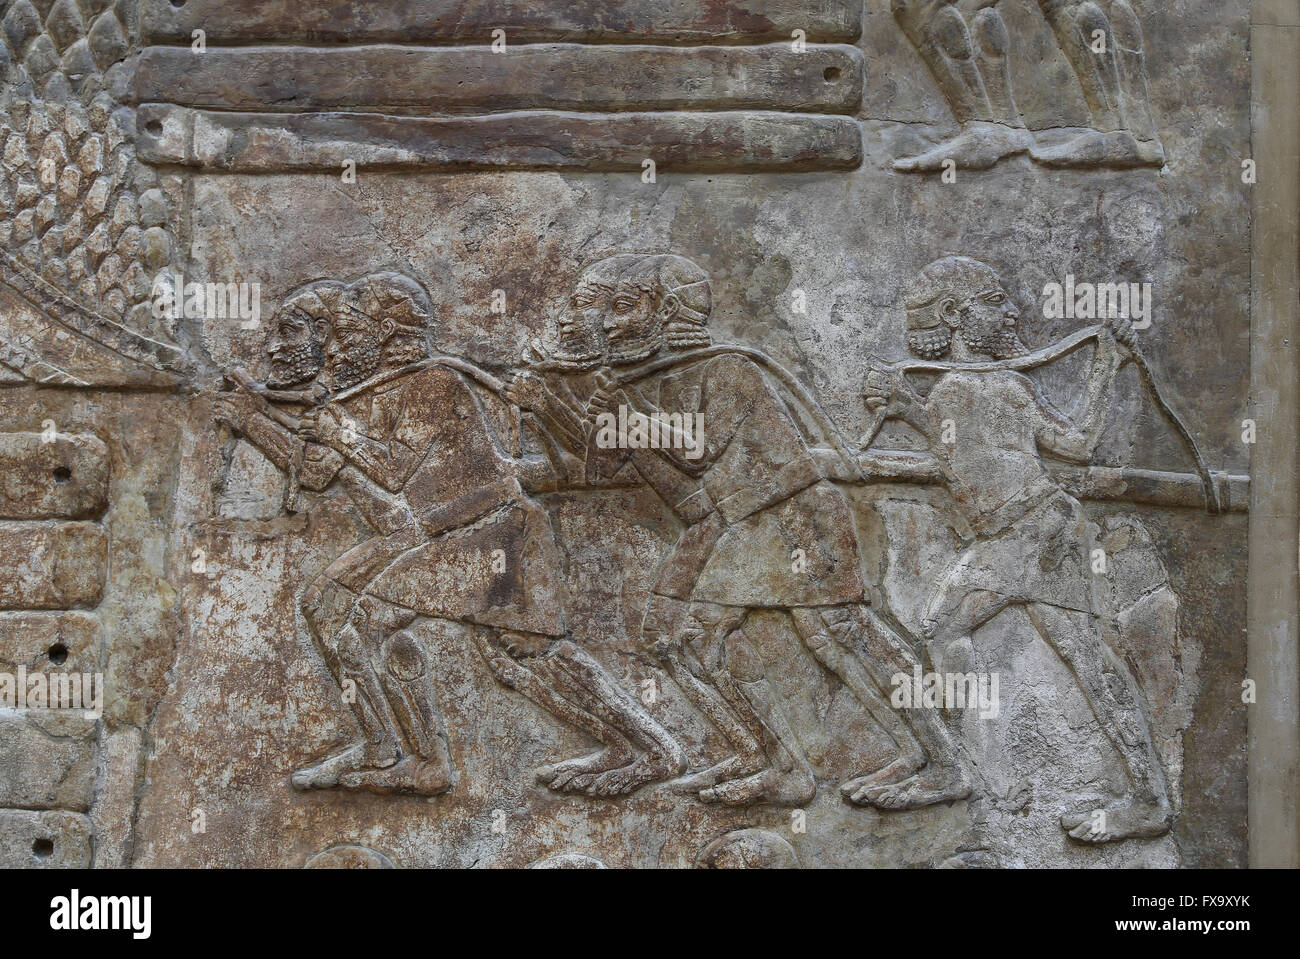 Slab. Transportation of timber (cedars of Lebanon). Men are pulling a load with a rope. Palace of Sargo II. Khorsabad, Iraq. Stock Photo